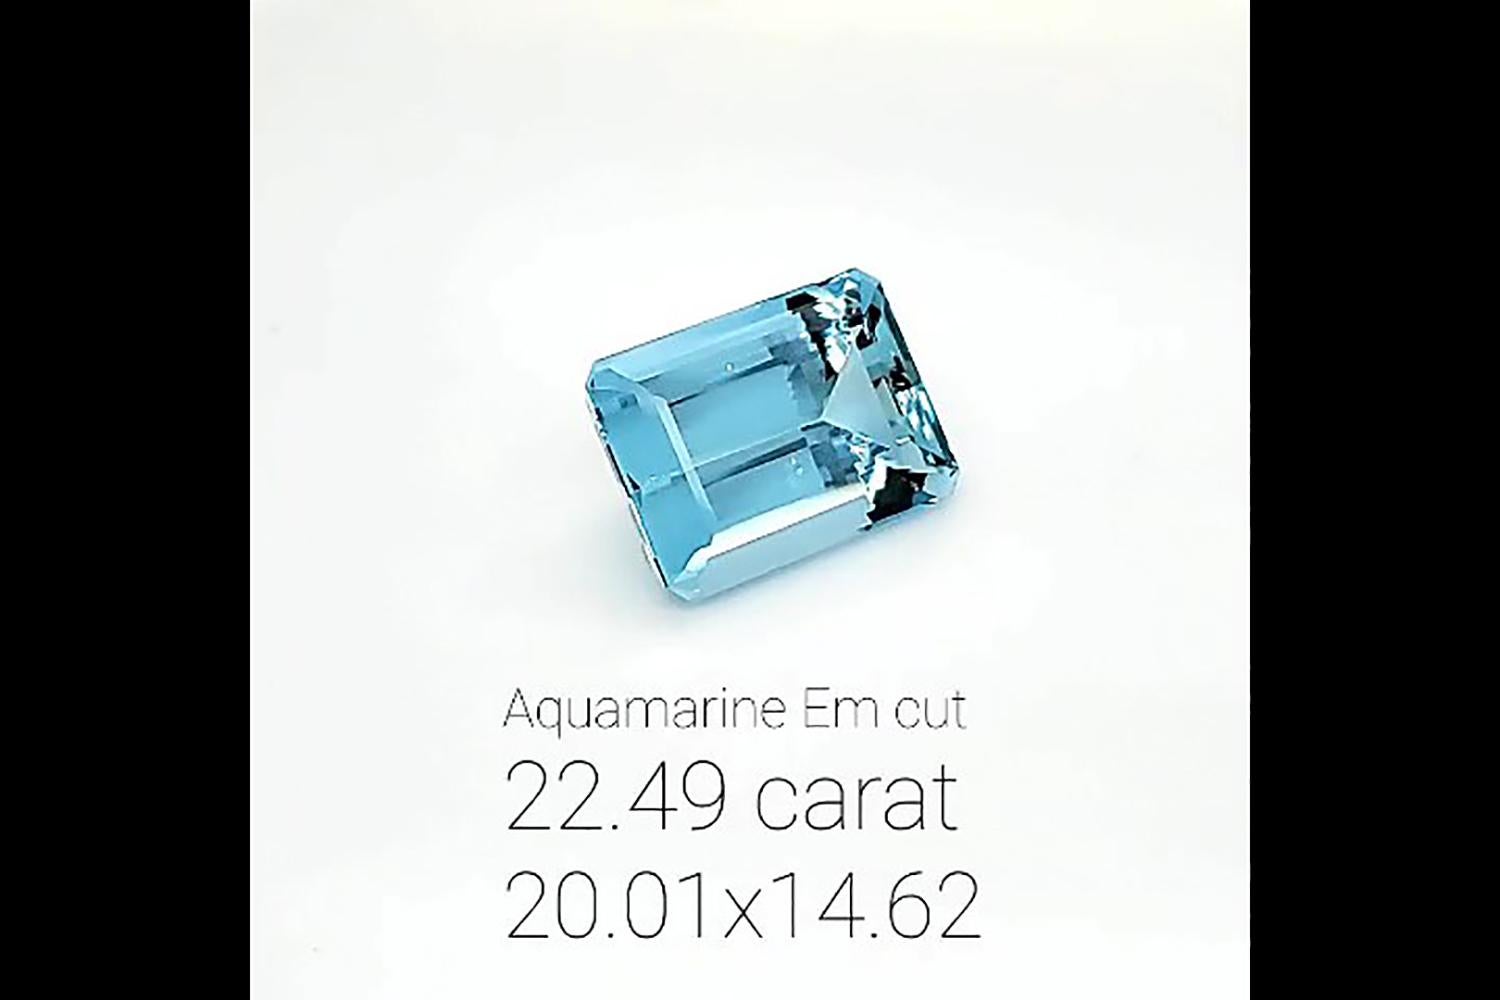 22.49 carat Natural Blue Emerald Aquamarine gemstone, of a high quality intense blue, transparent mineral with no inclusions, perfect choice for collectors or to commission a custom, unique piece of jewelry with it. 
GIA Certified gemstone
We are